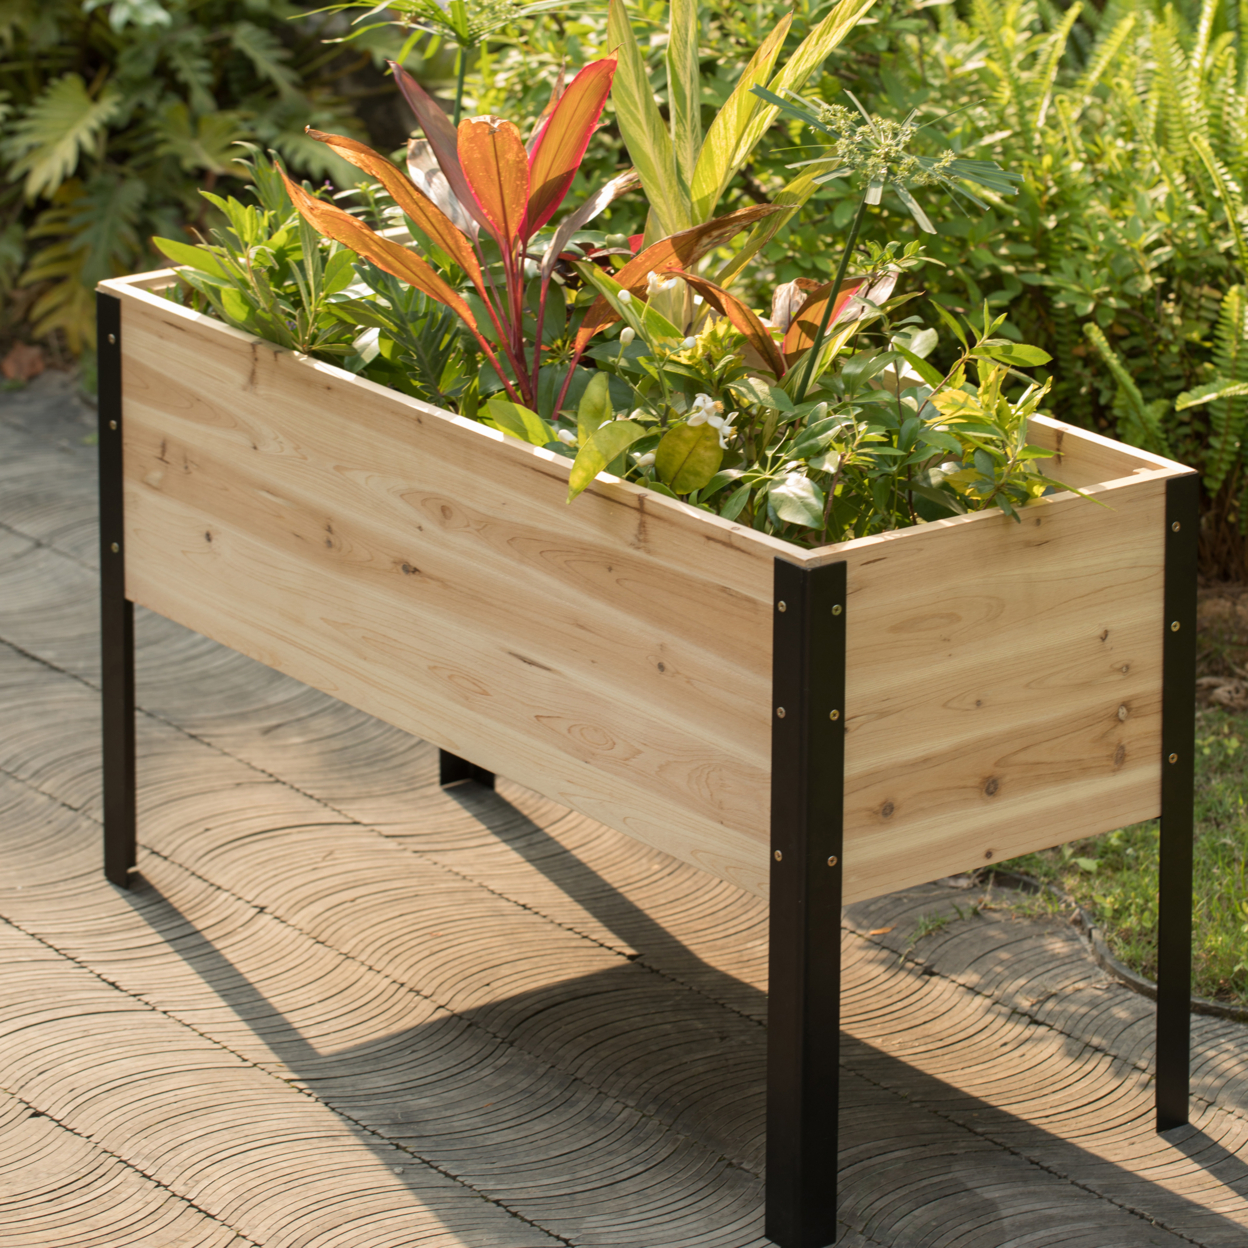 Elevated Outdoor Raised Rectangular Planter Bed Box Solid Wood With Steel Legs, Natural